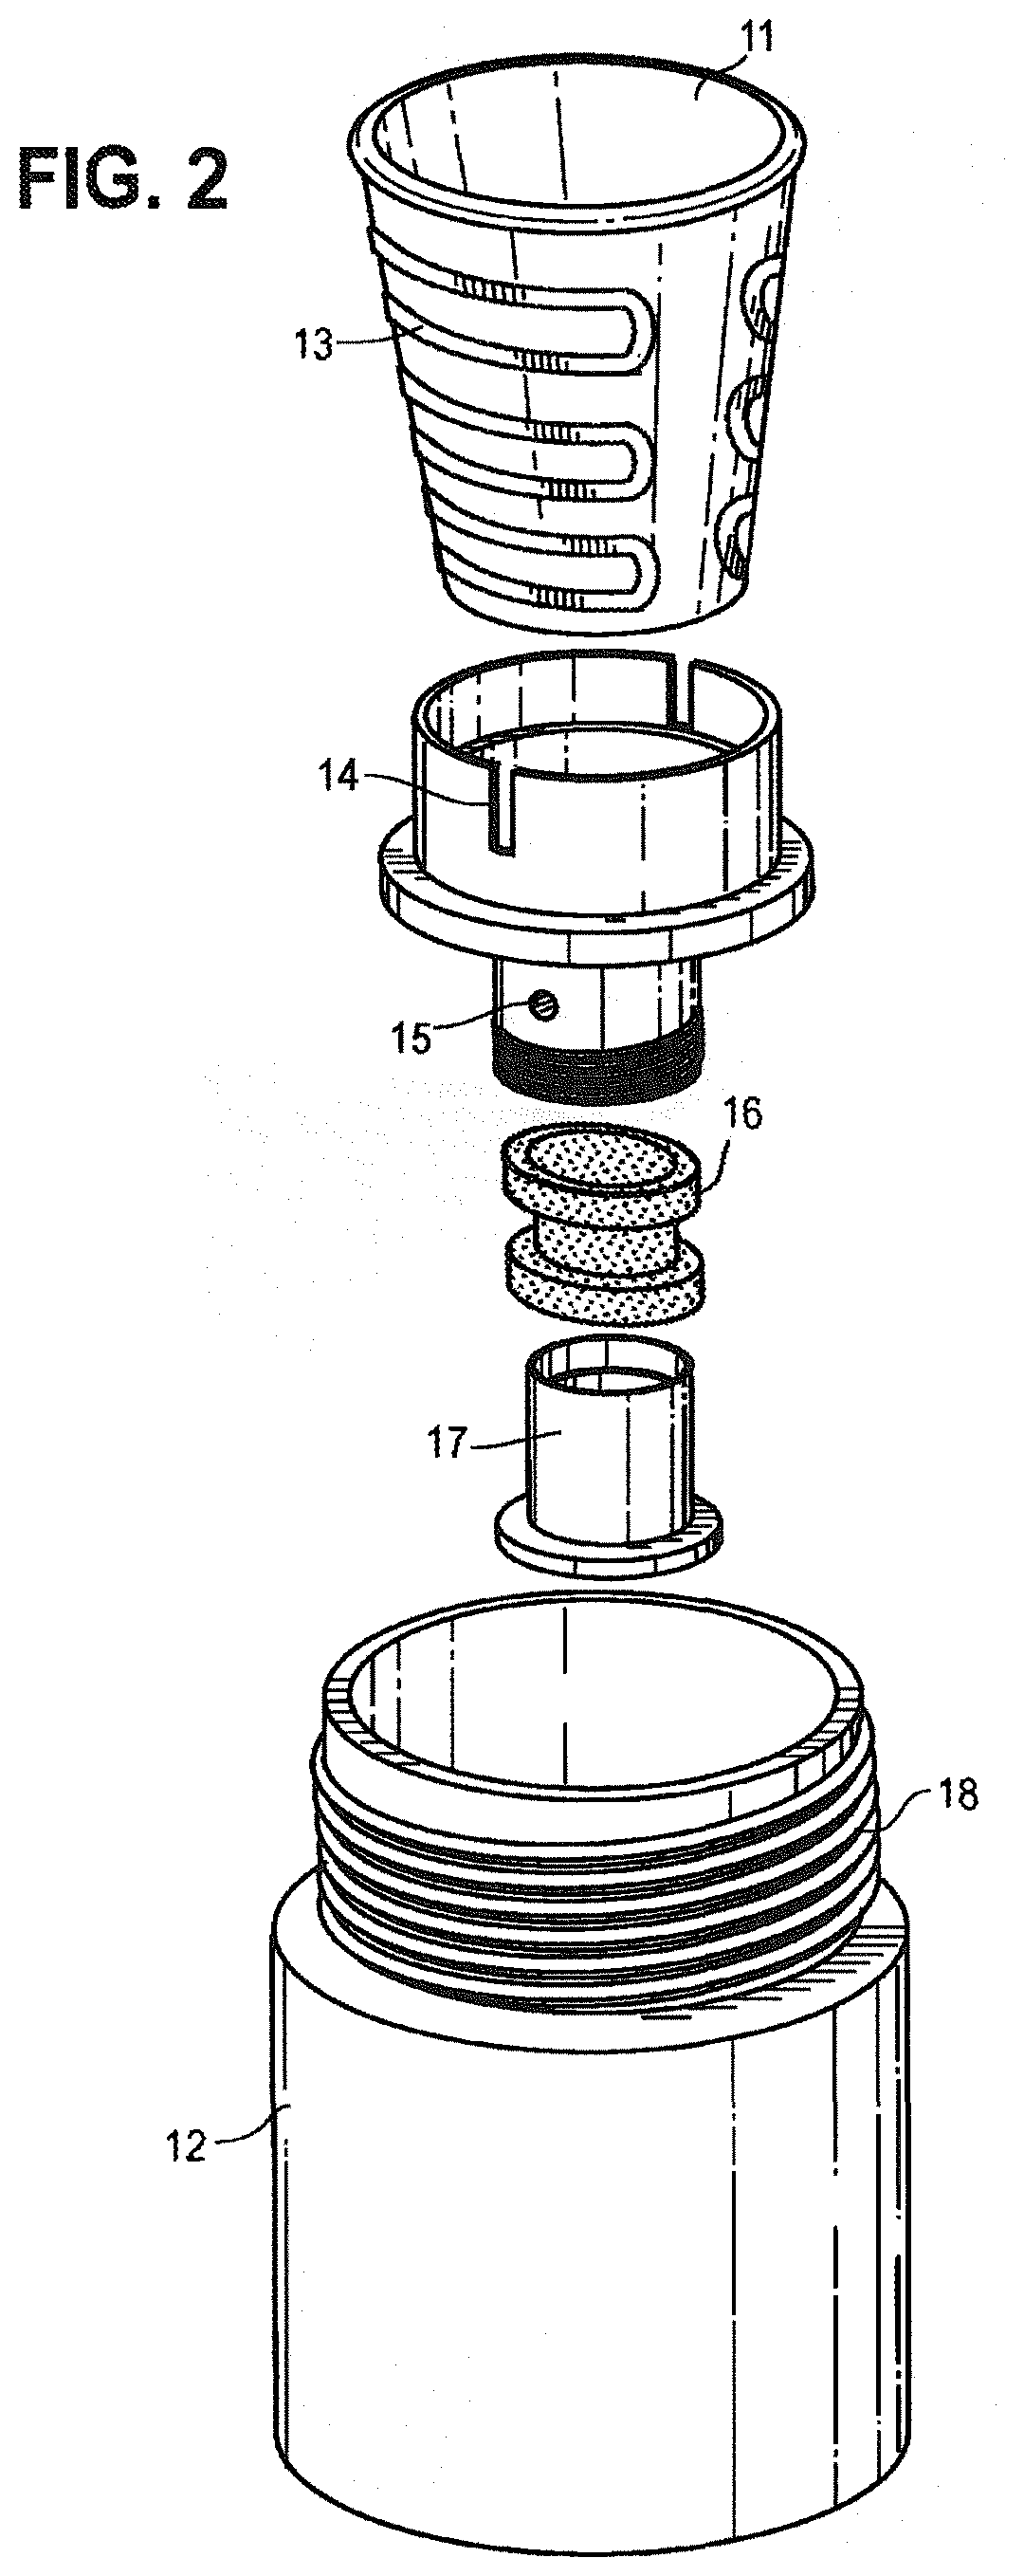 Vaporizable Tobacco Wax Compositions and Container Thereof